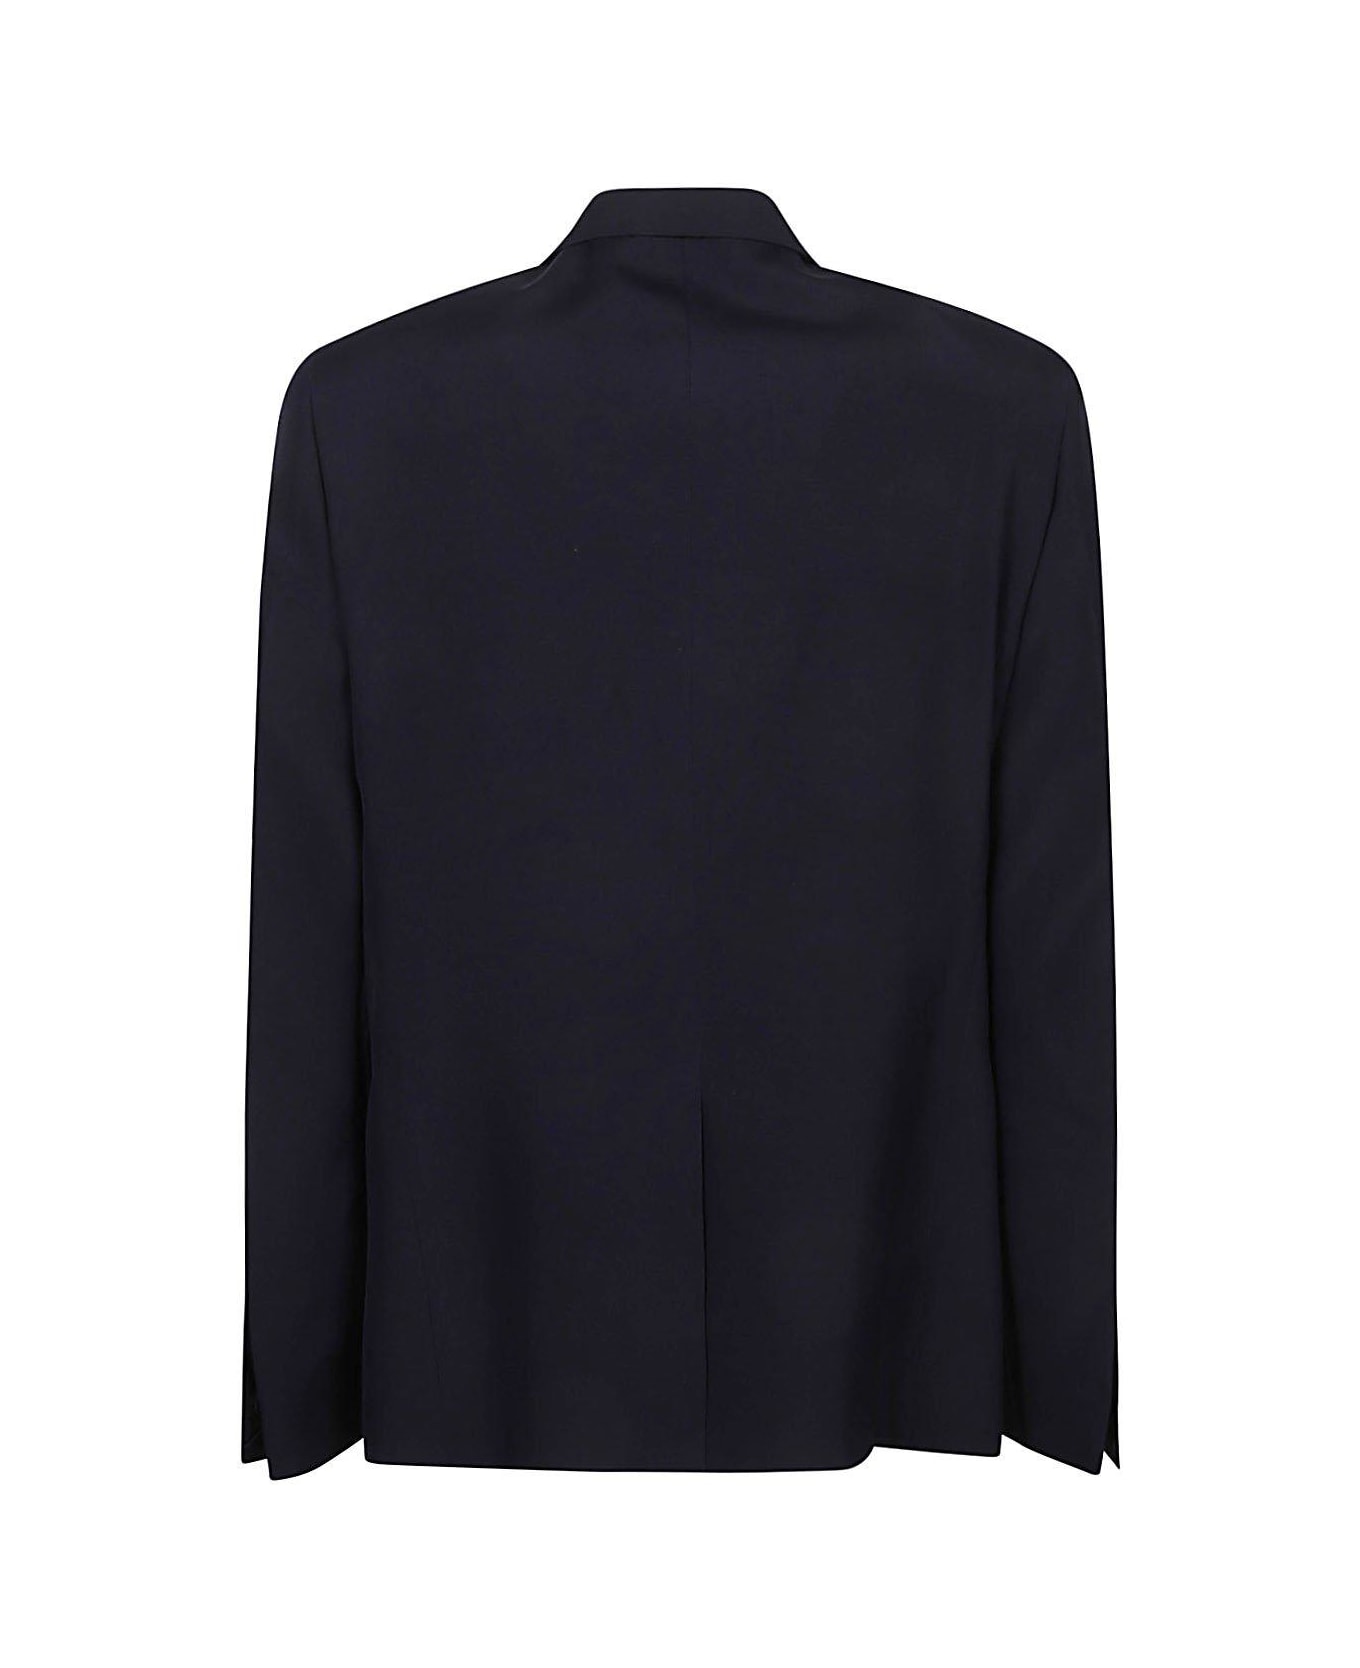 Givenchy Slim-fit Buttoned Jacket - NAVY ブレザー